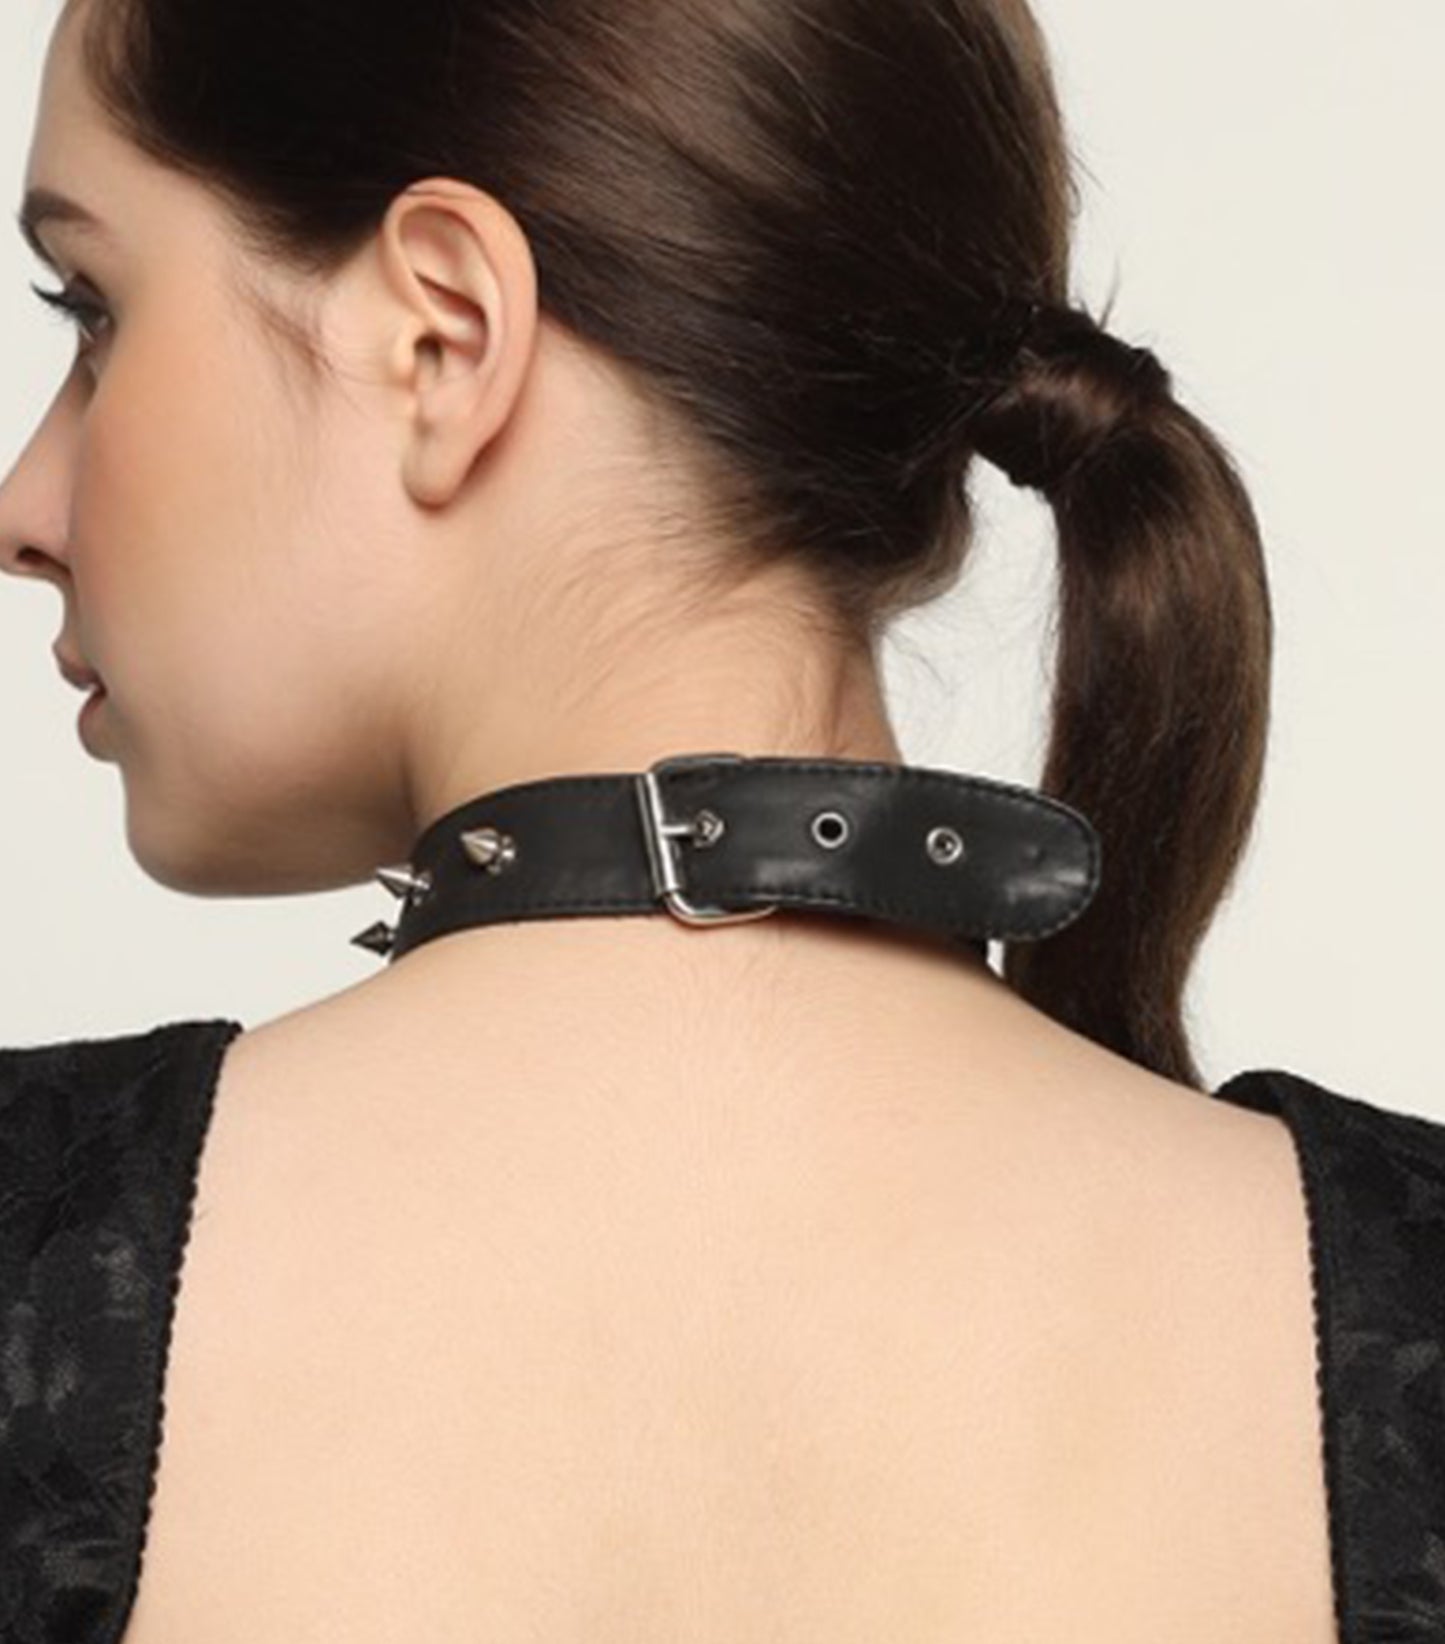 Retro Rebellion - Punk Goth Studded Leather Choker with Spikes